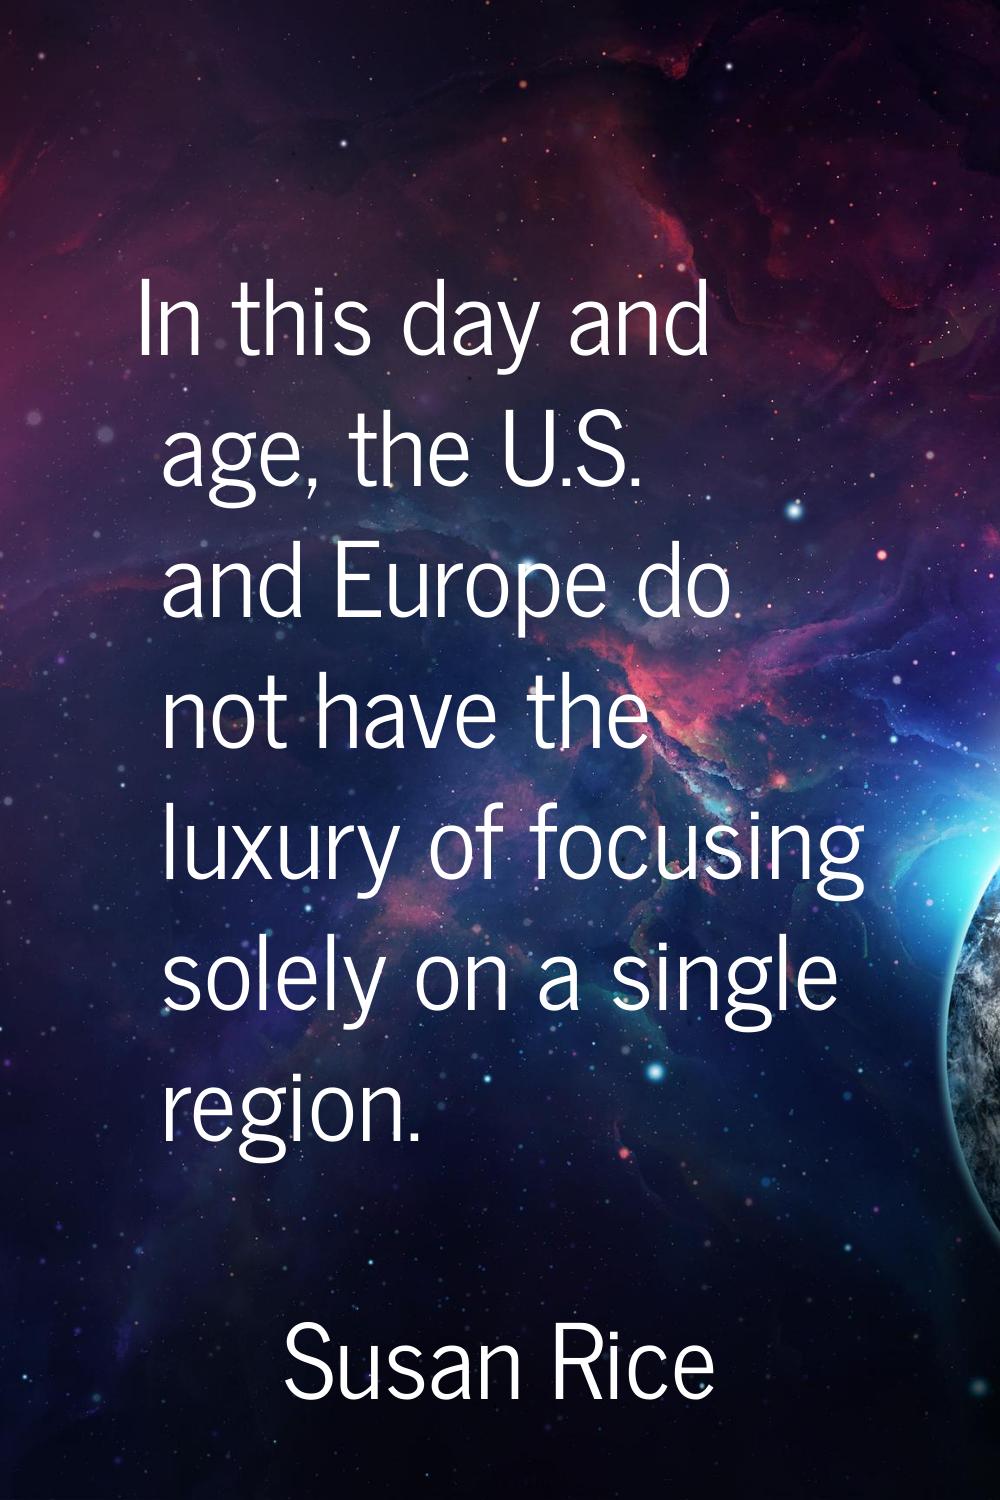 In this day and age, the U.S. and Europe do not have the luxury of focusing solely on a single regi